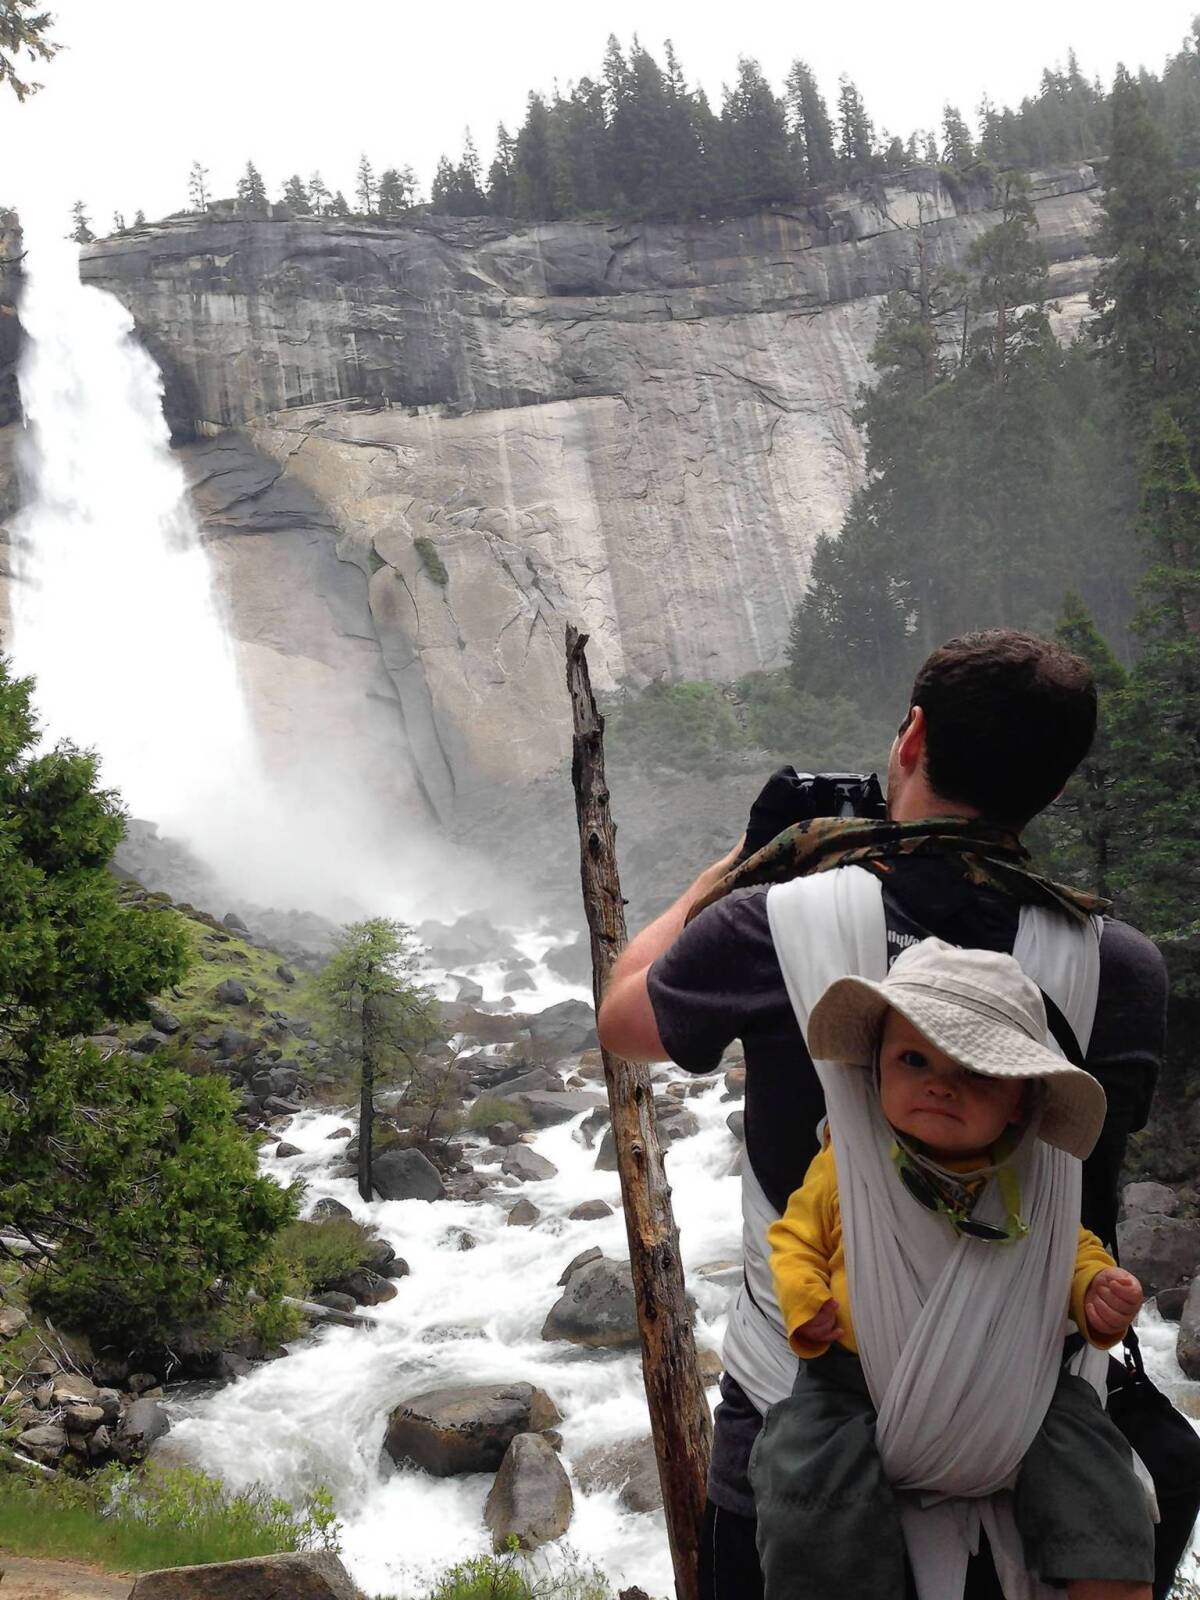 A hiker photographs Nevada Falls along the Mist Trail in Yosemite National Park with a baby on his back.